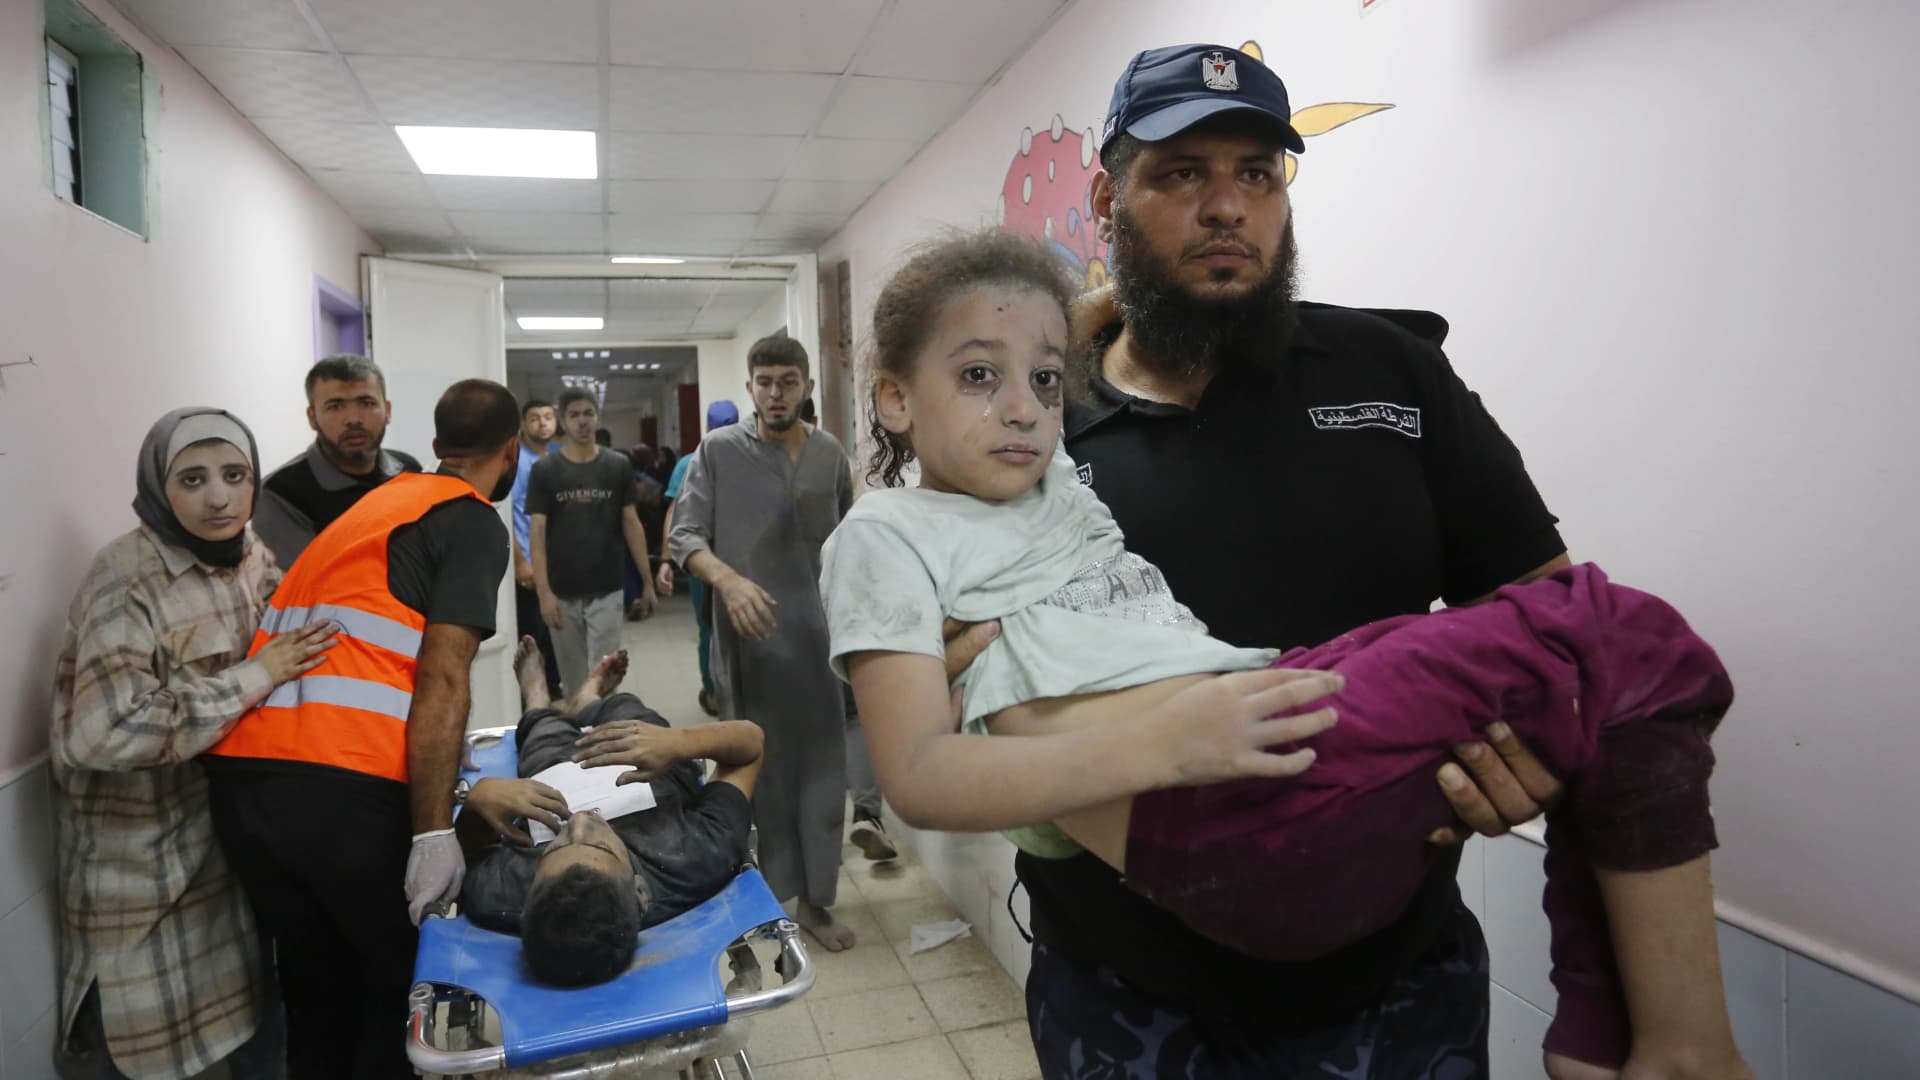 (EDITORS NOTE: Image depicts graphic content) Injured Palestinians including children are brought to hospital after Israeli airstrike in Deir-Al-Balah, Gaza on October 14, 2023.